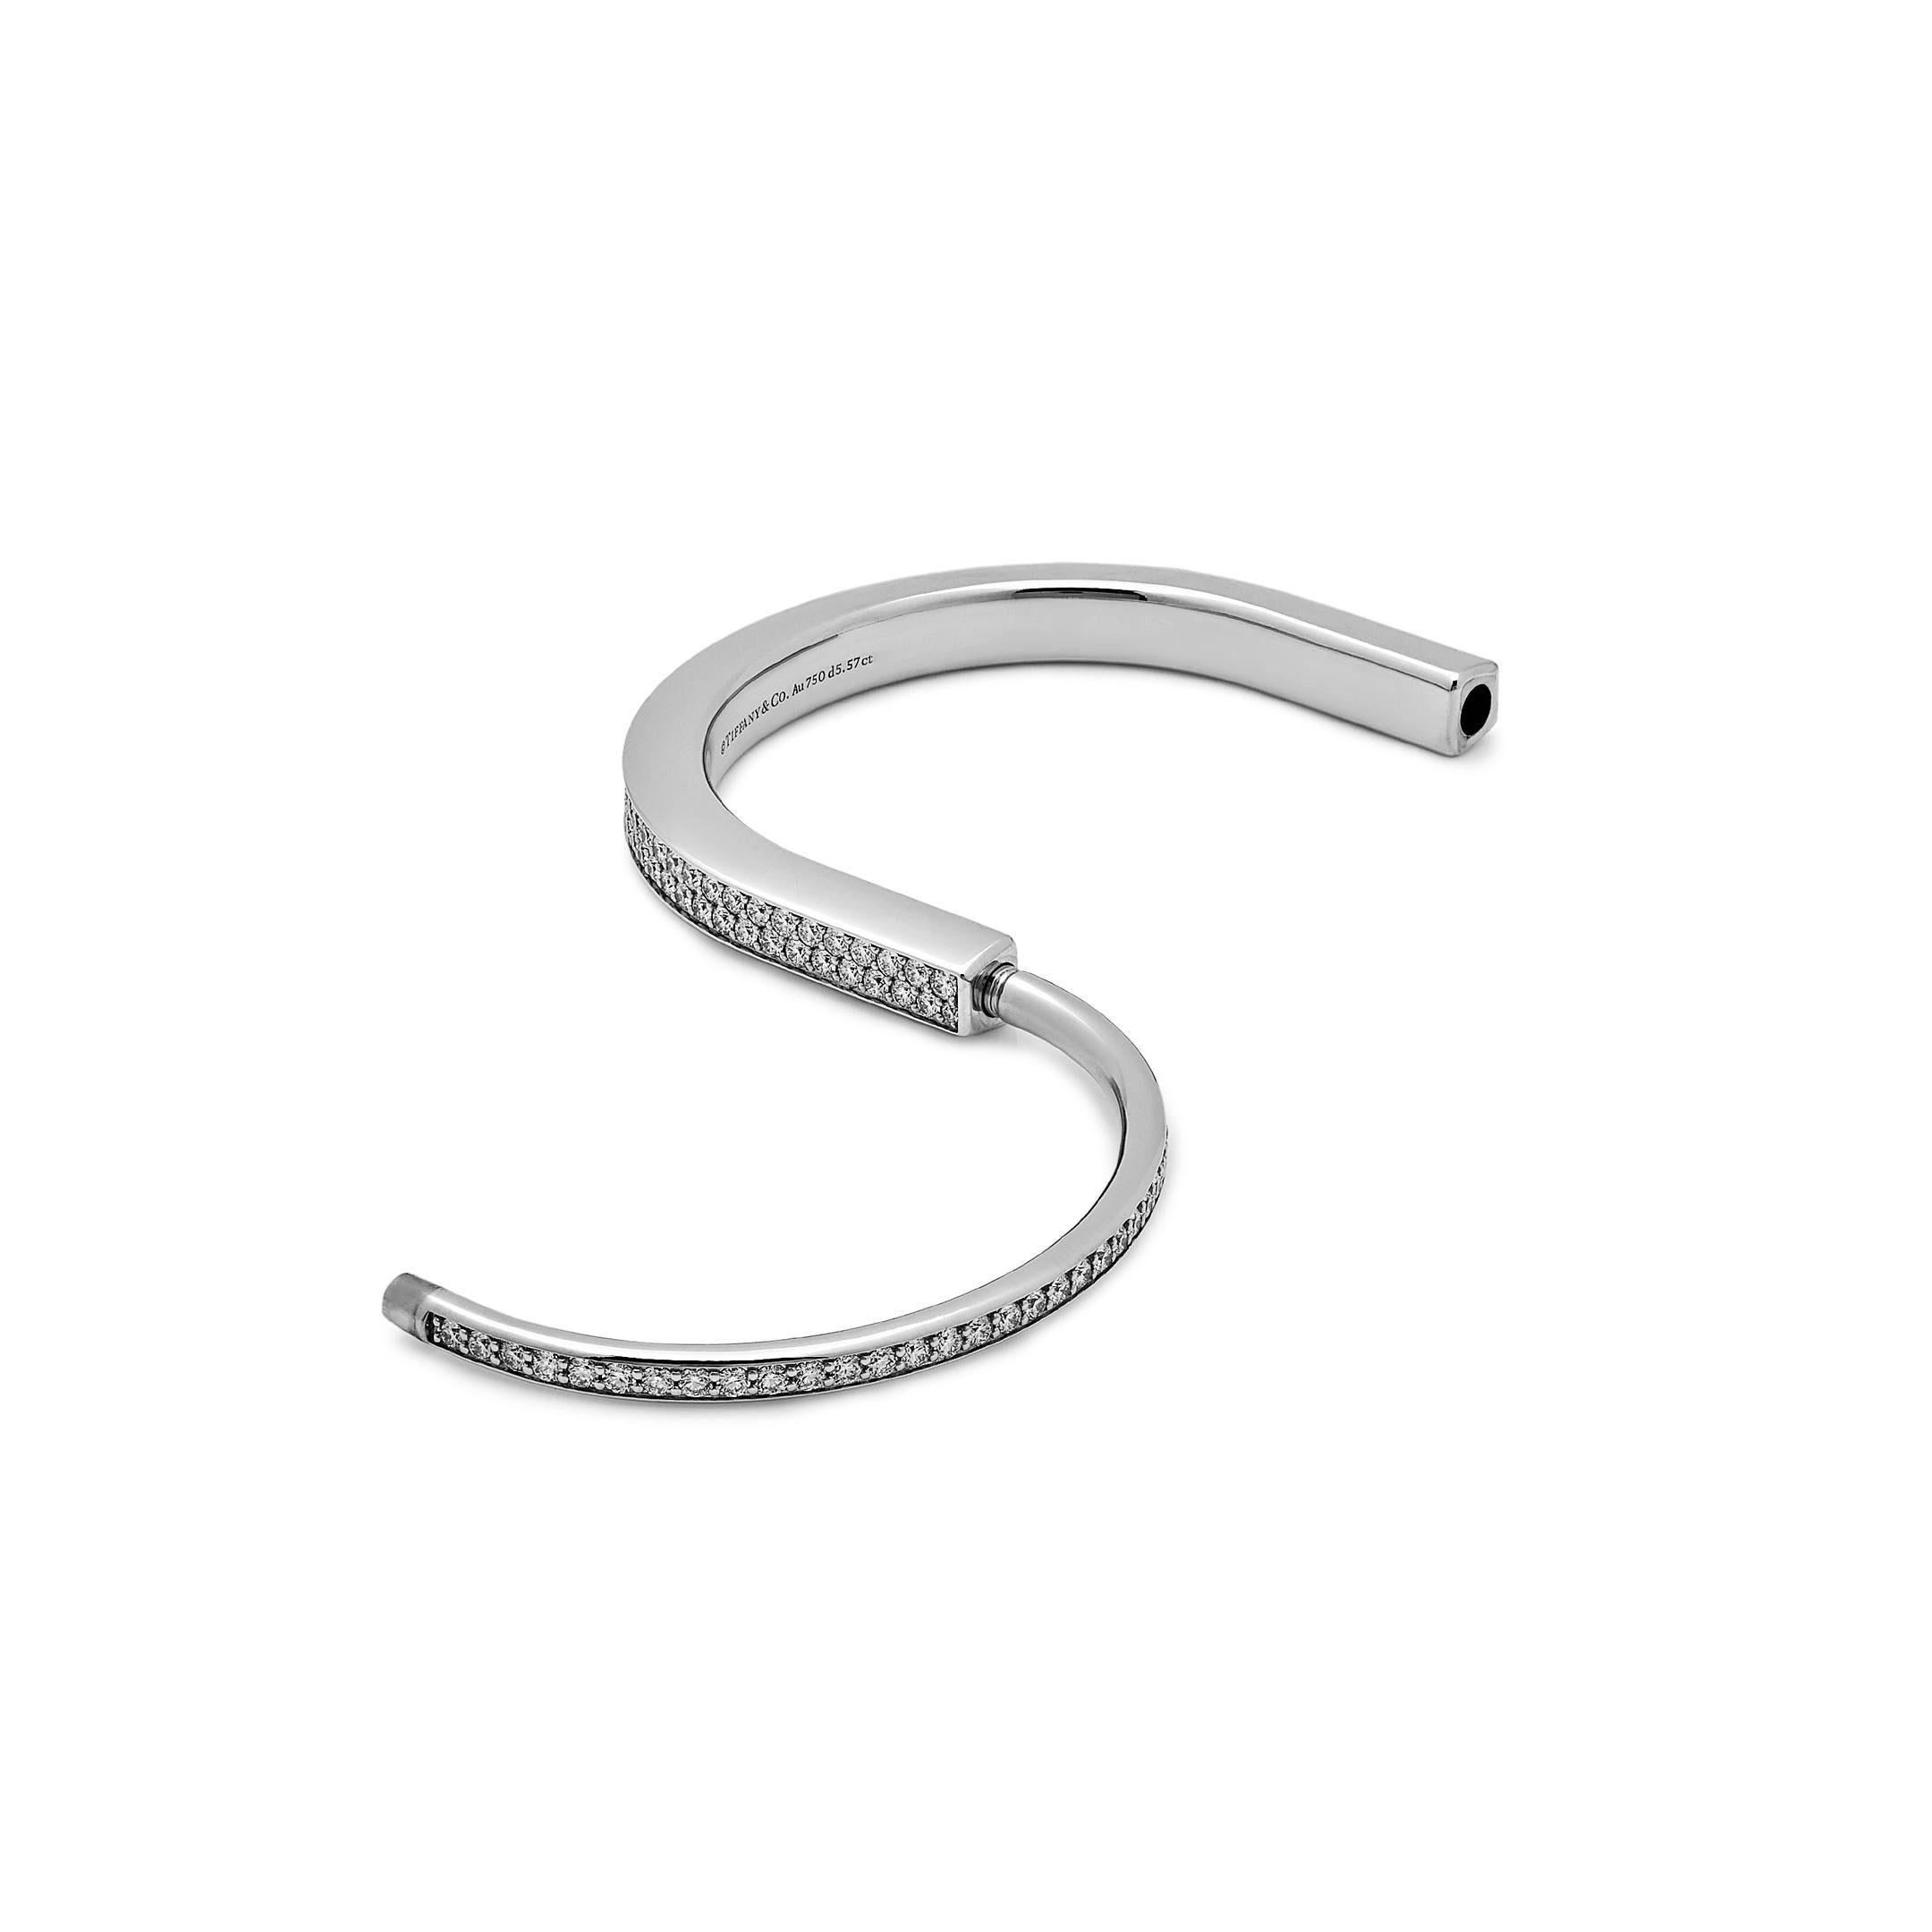 Designed to be worn by all genders, The Tiffany & Co Lock Bangle is a bold visual statement about the personal bonds. 

Crafted from 18-karat white gold, the Tiffany Lock bangle features an innovative clasp a nod to Tiffany's history. Hand-set